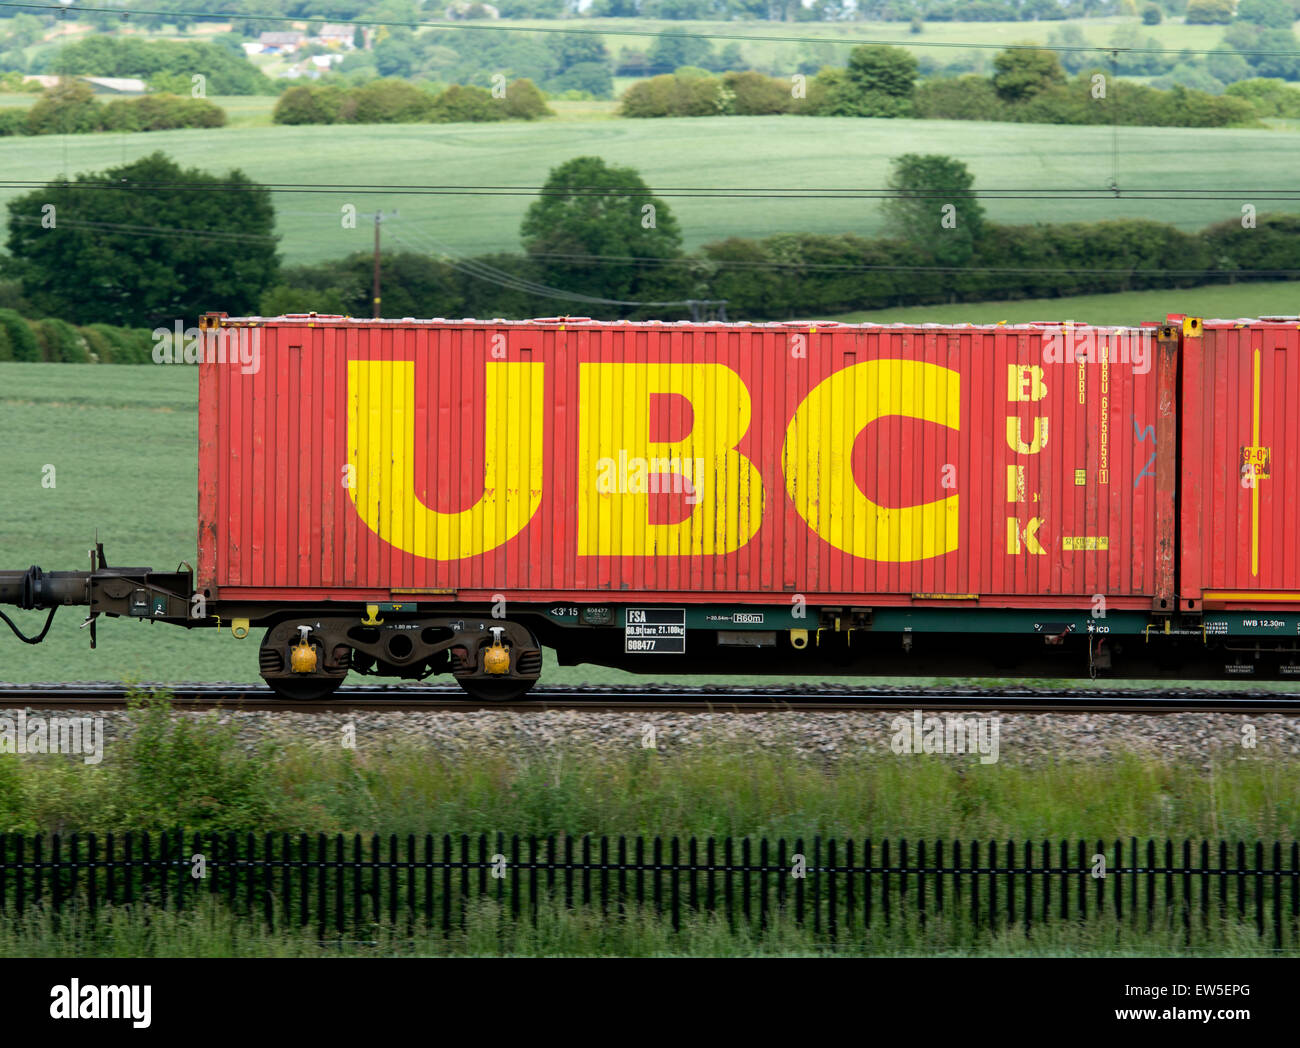 UBC shipping container on a train, Northamptonshire, UK Stock Photo